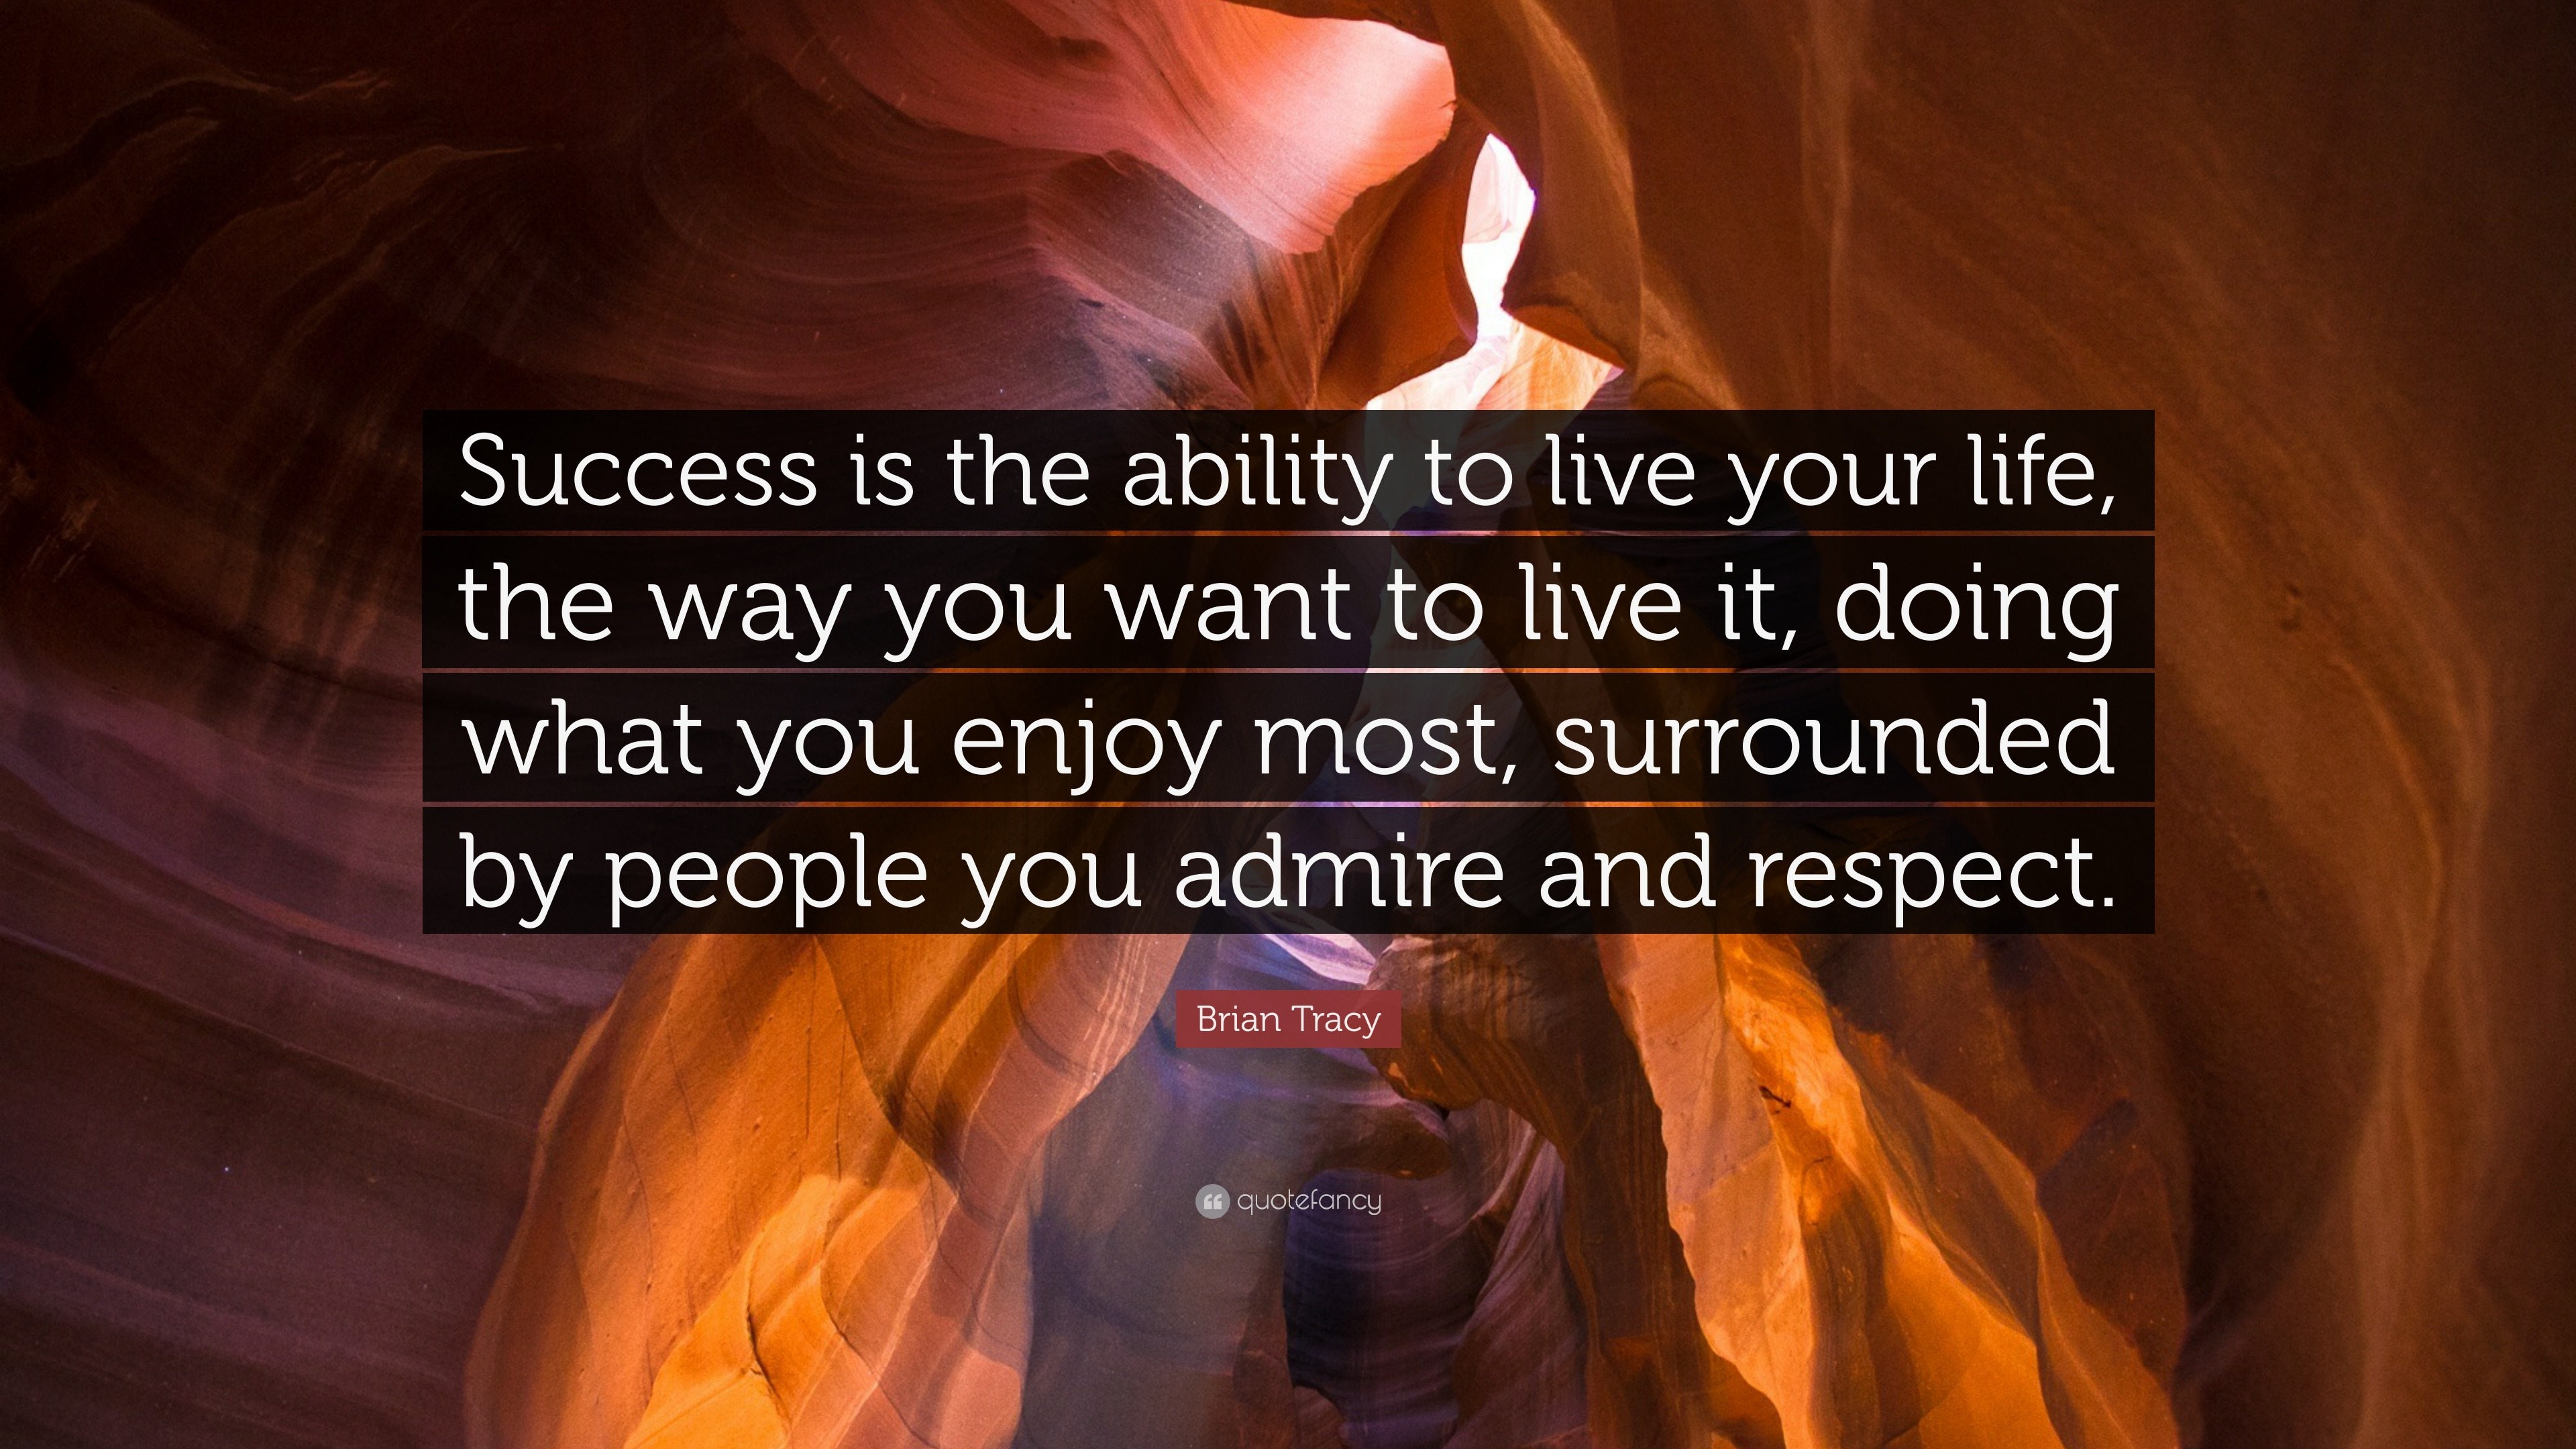 Are You Enjoying the Process on Your Way to Success?